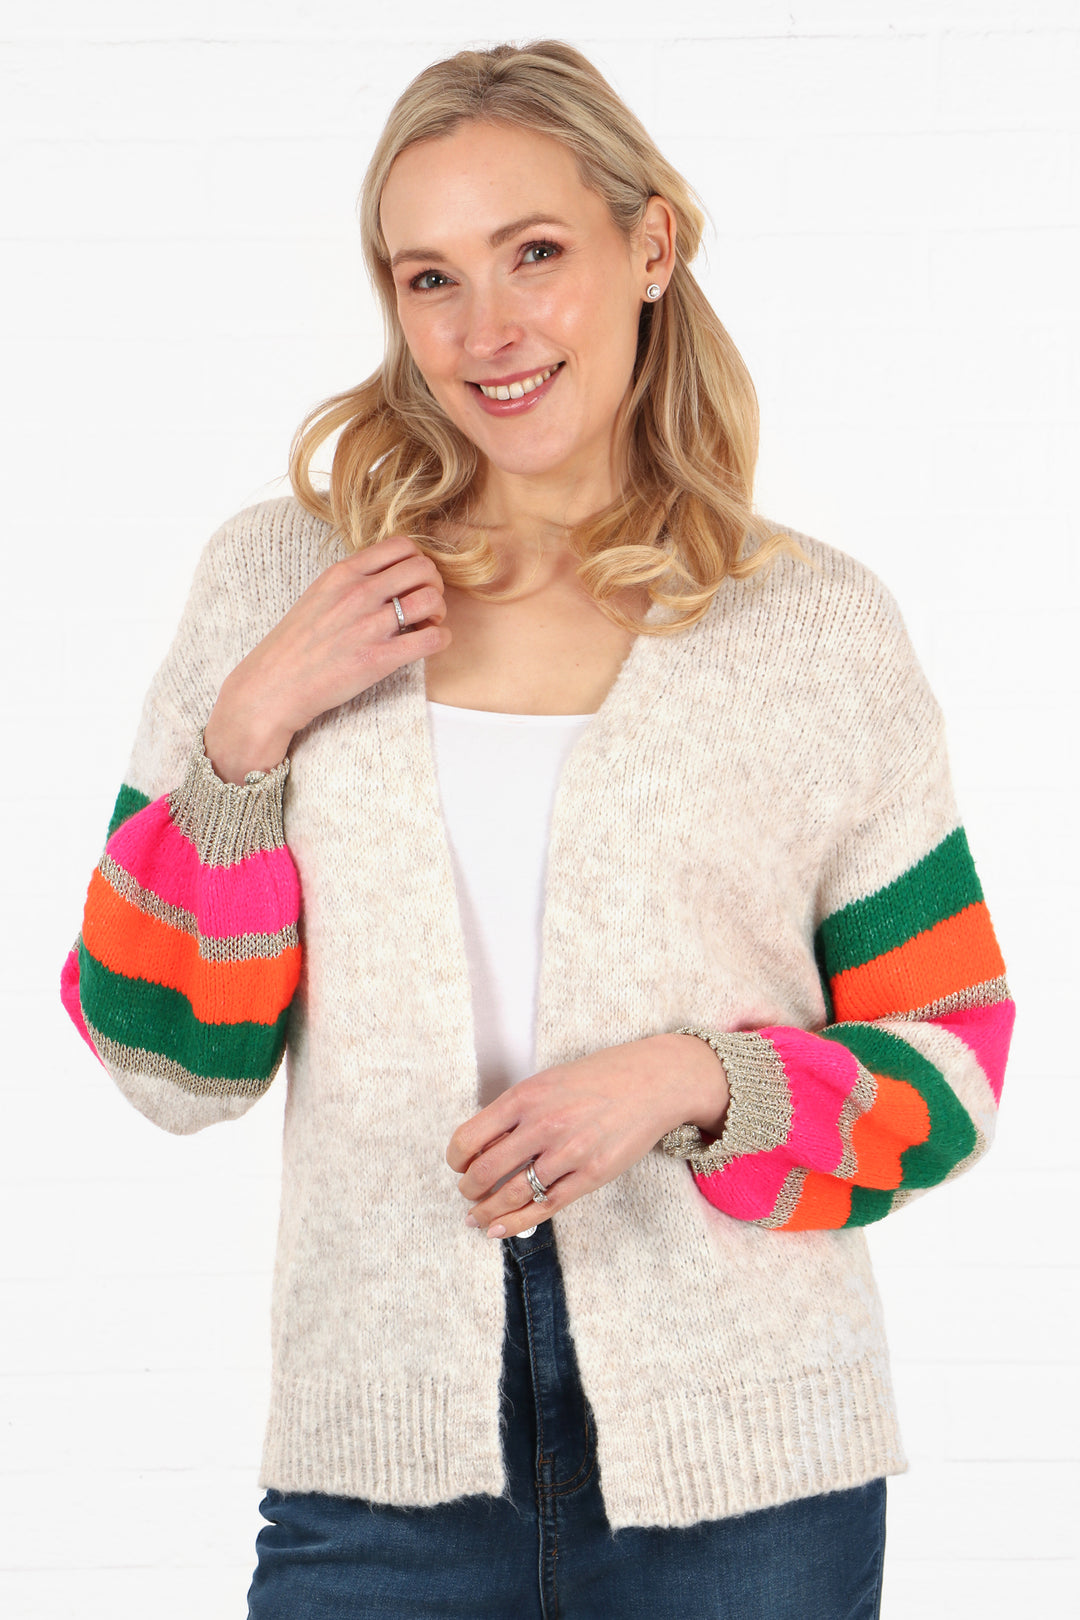 model wearing a cream knit open front short cardigan with colourful striped sleeves. Sleeves are green, pink, orange and gold glitter striped